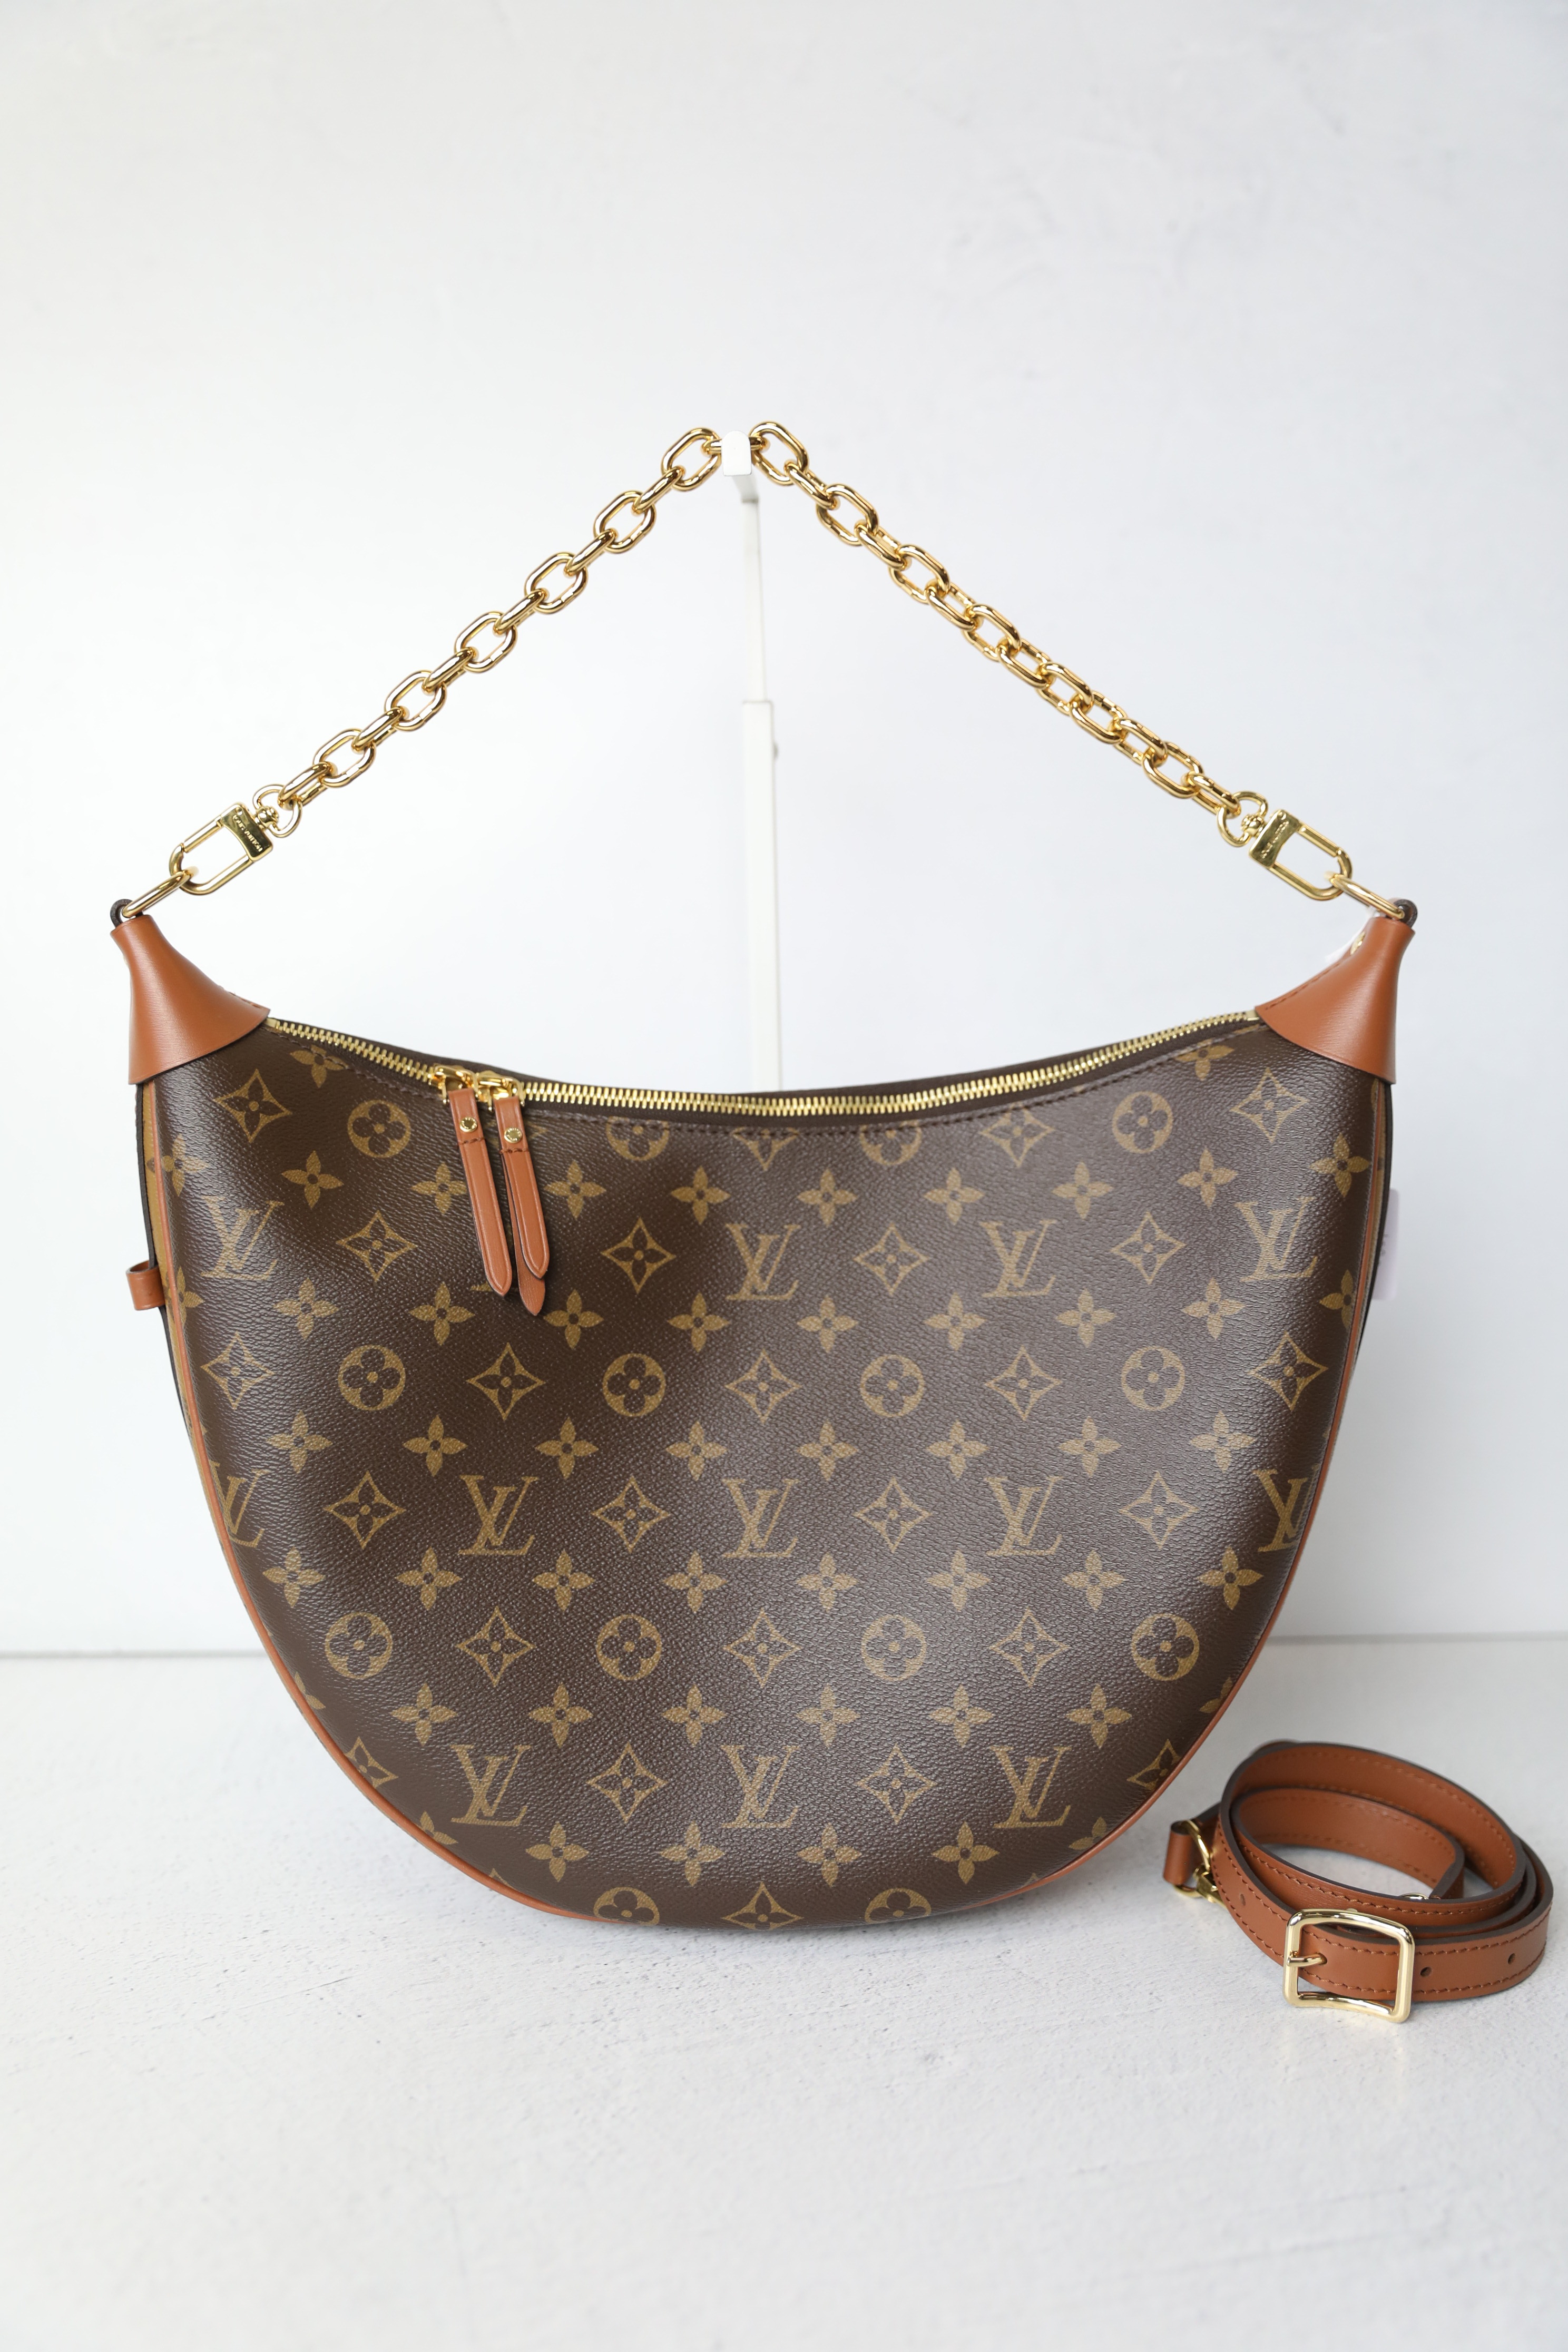 What's inside the Louis Vuitton Loop Hobo… Introducing our brand